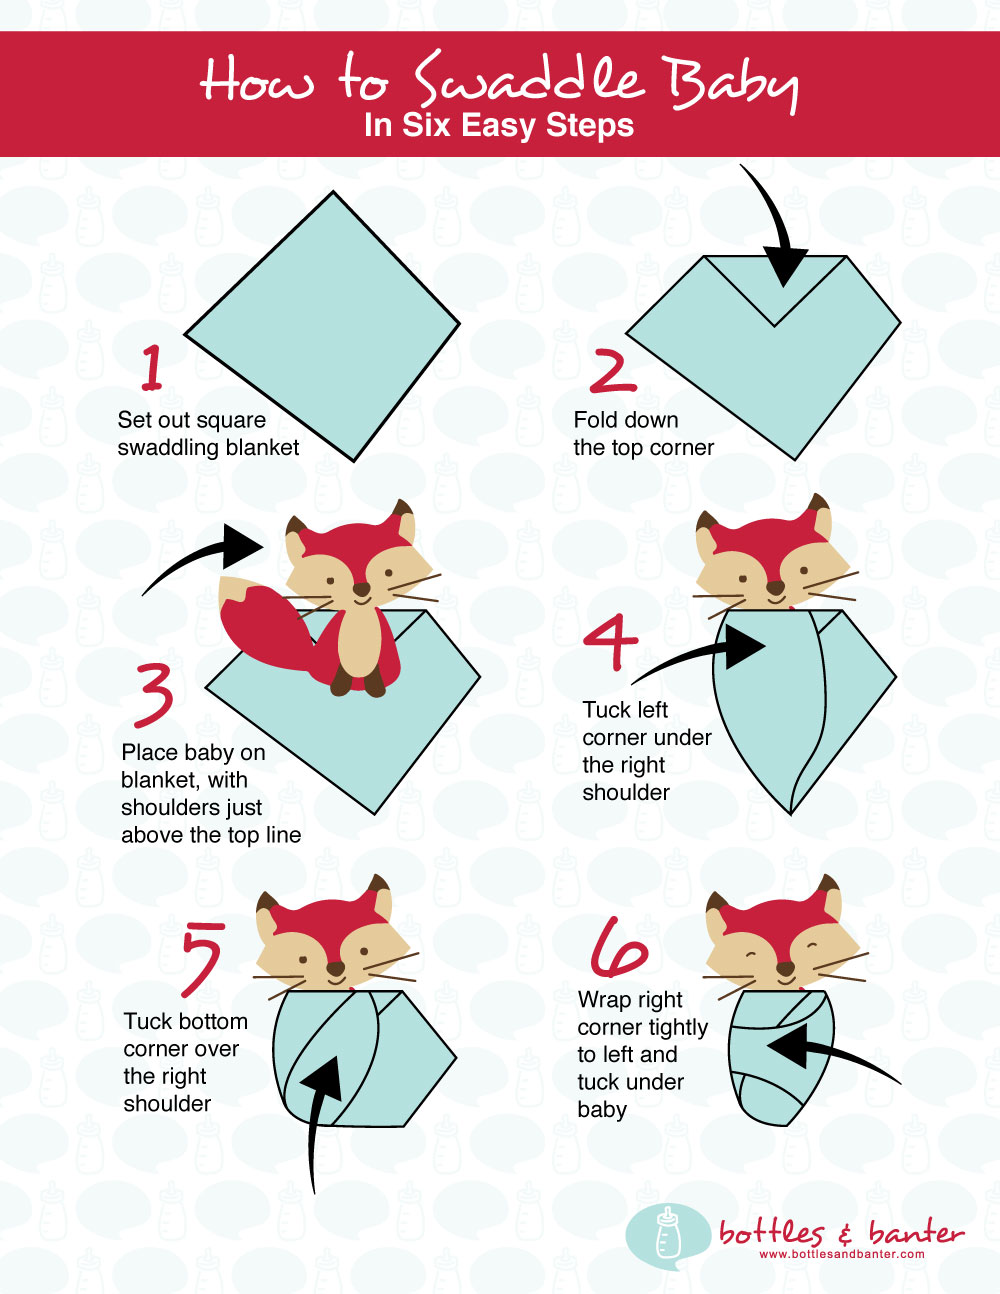 How to Swaddle a Baby 